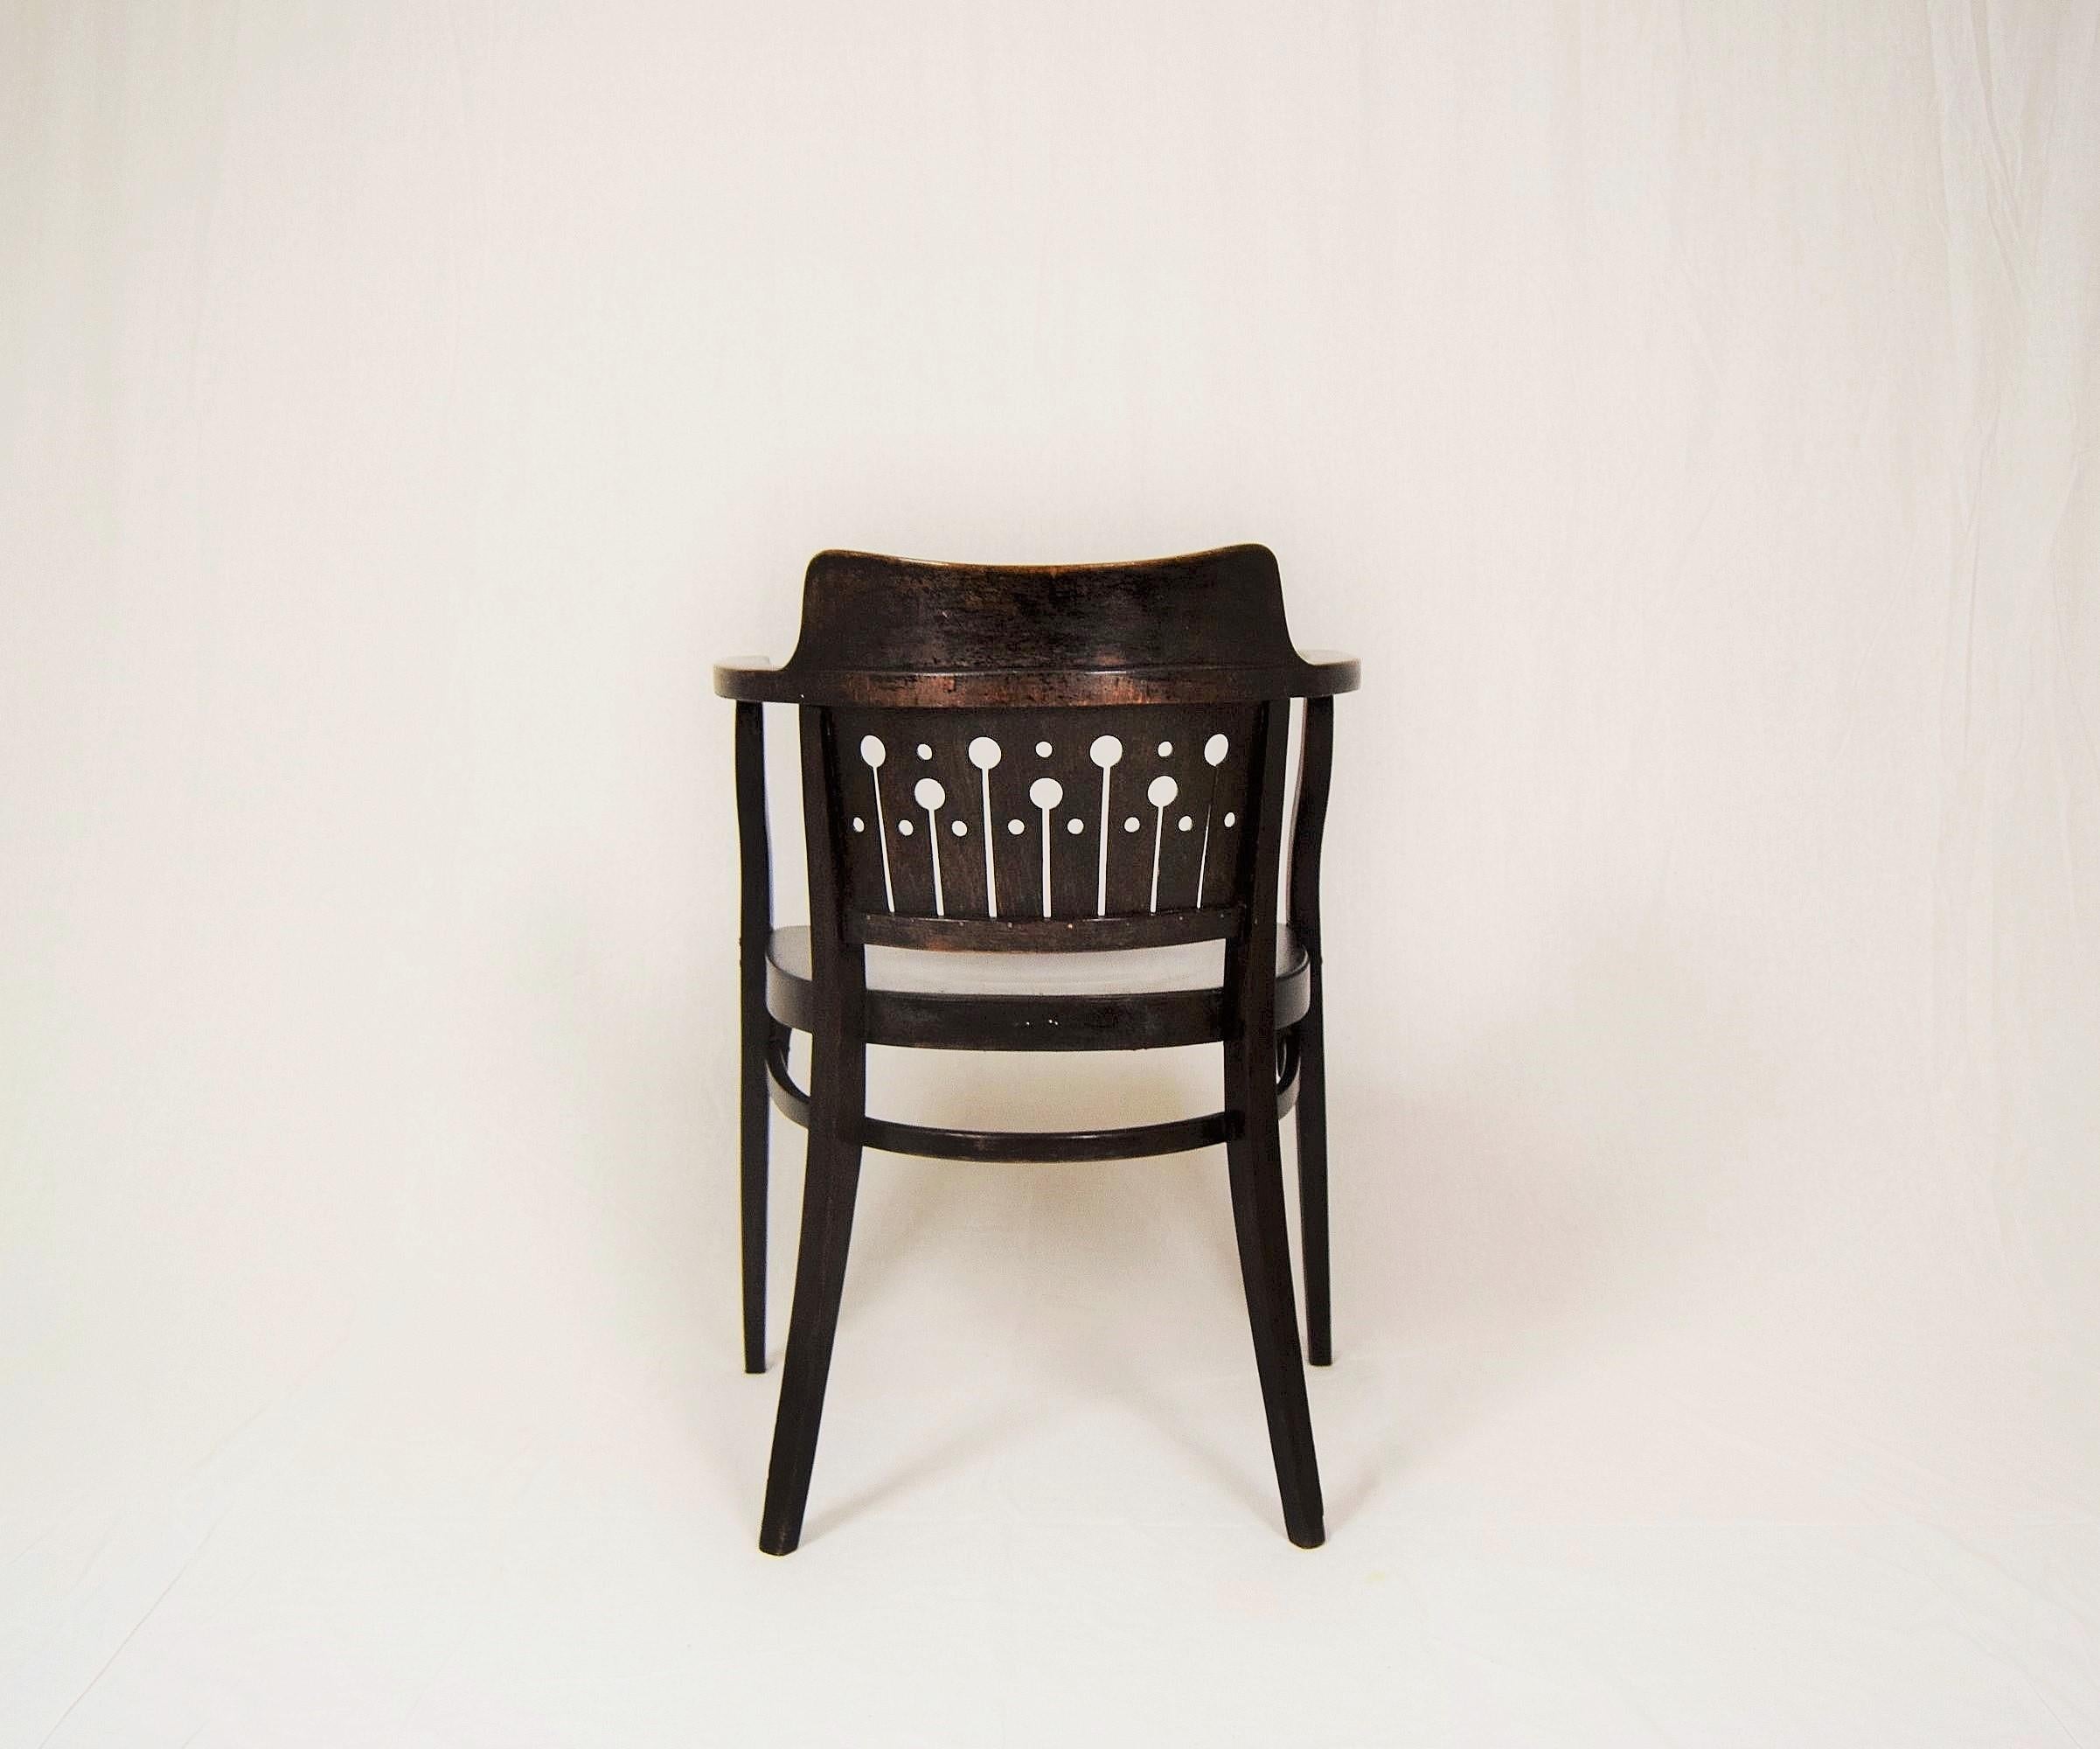 Hand-Crafted Otto Wagner Armchair by Thonet, Austria, circa 1905